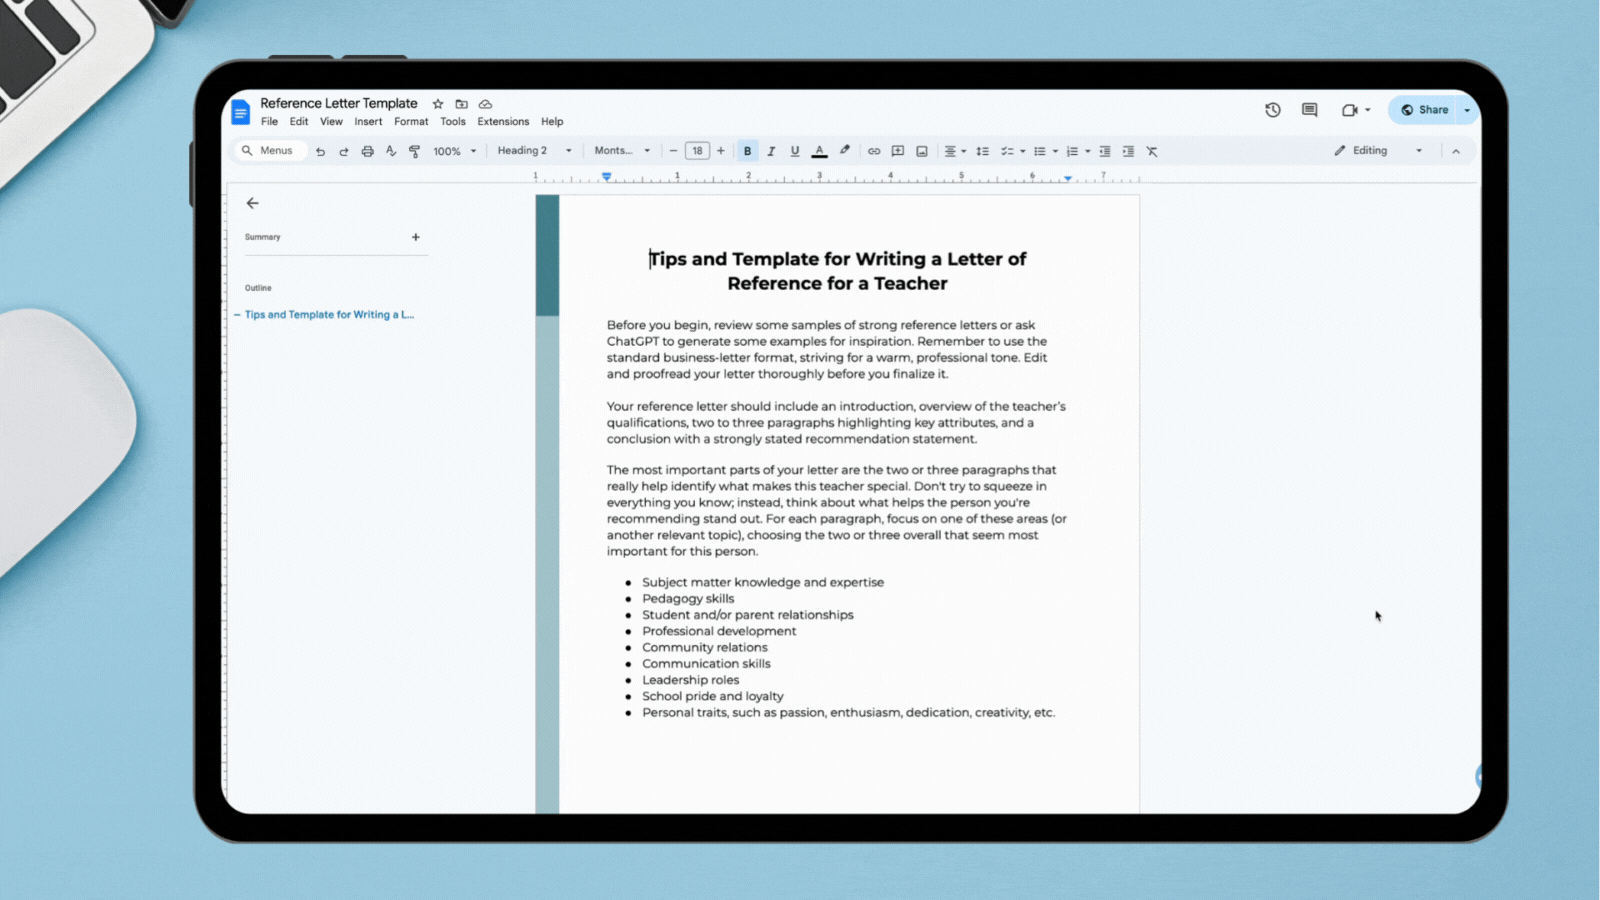 Gif featuring screenshots of printable worksheets that guide educators through how to write a reference letter.